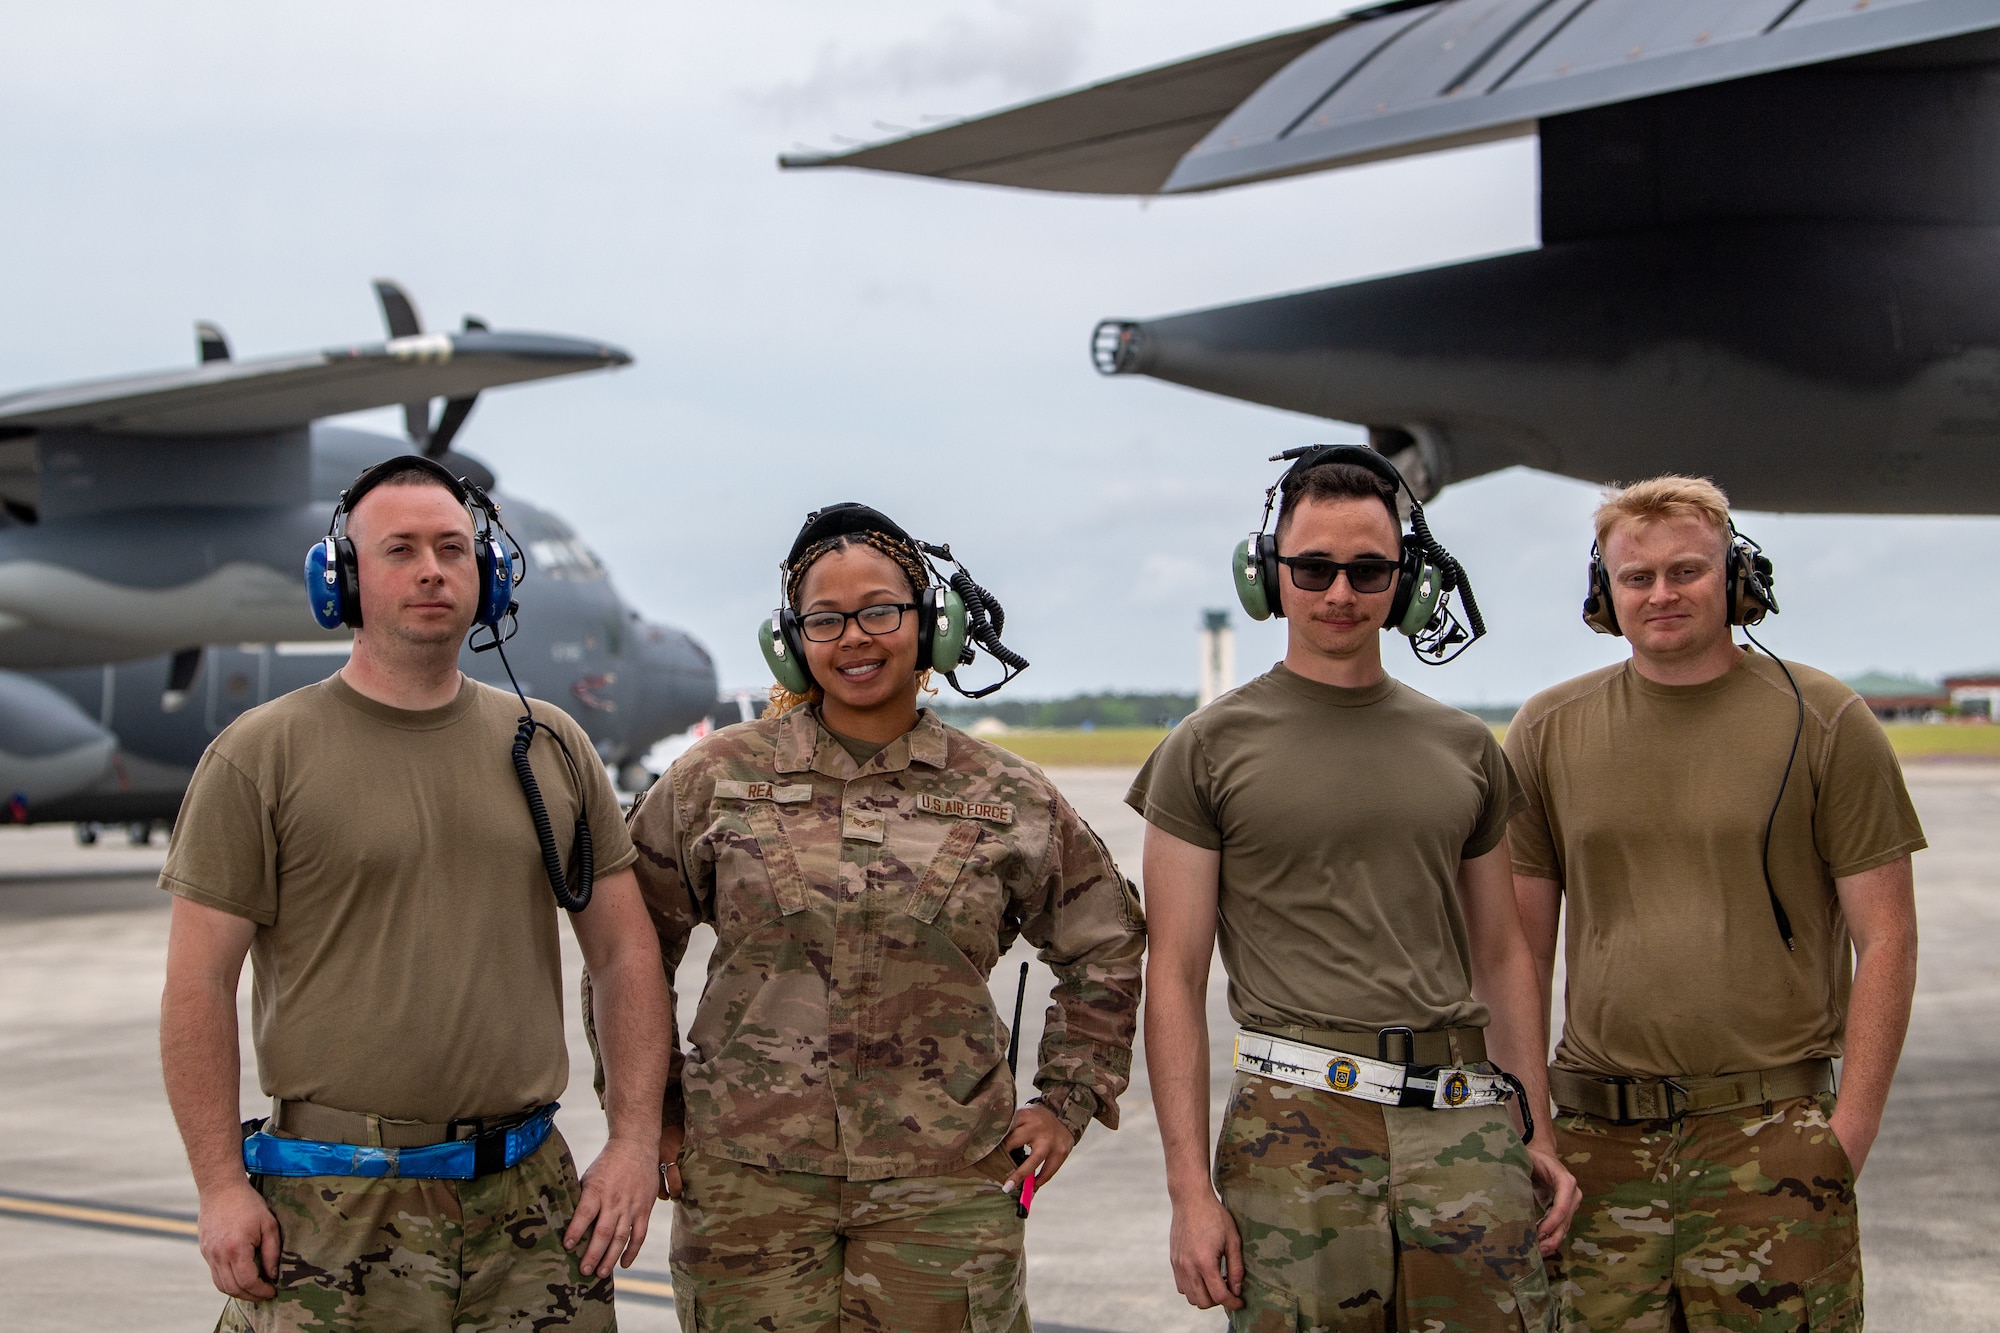 U.S. Air Force Airmen assigned to the 23rd Wing pose for a photo during Exercise Ready Tiger 24-1 at Savannah Air National Guard Base, Georgia, April 10, 2024. During Ready Tiger 24-1, the 23rd Wing will be evaluated on the integration of Air Force Force Generation principles such as Agile Combat Employment, integrated combat turns, forward aerial refueling points, multi-capable Airmen, and combat search and rescue capabilities. (U.S. Air Force photo by Senior Airman Courtney Sebastianelli)